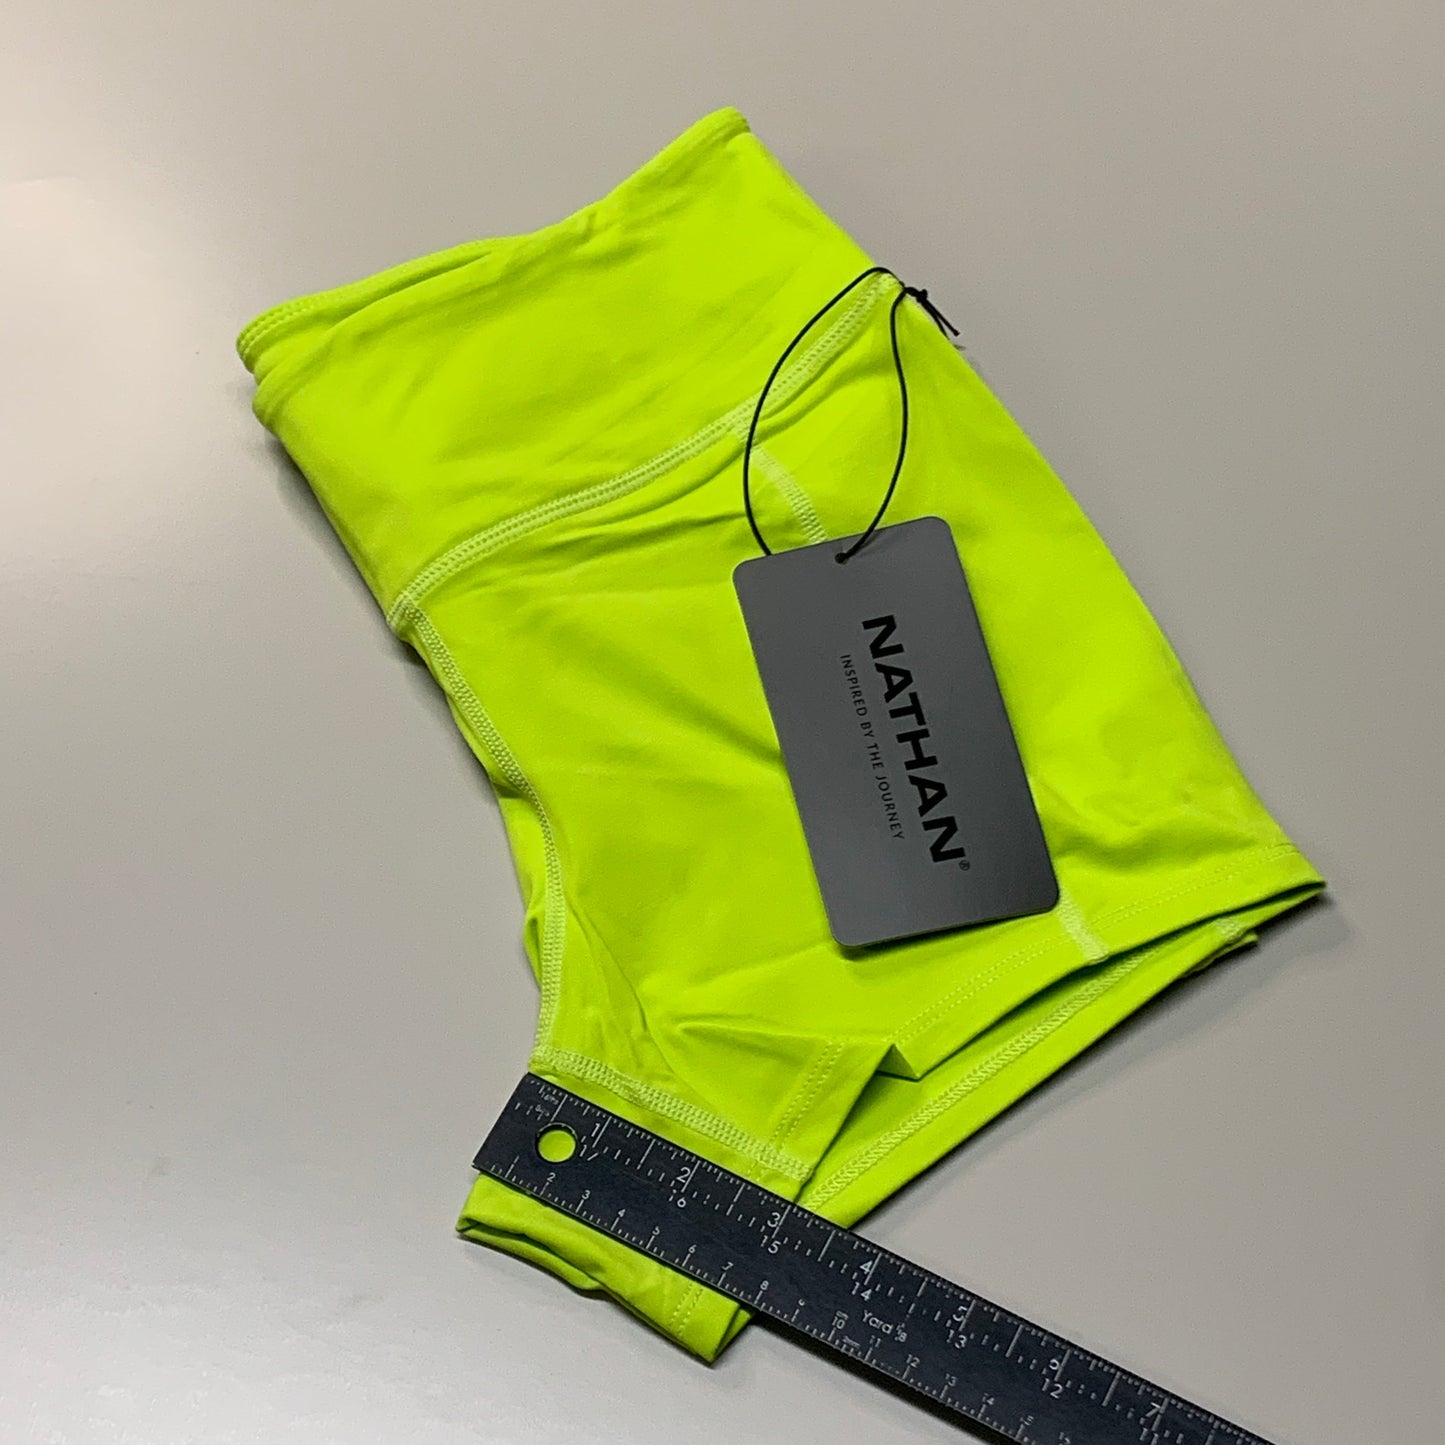 NATHAN Interval 3" Inseam Bike Short Women's Bright Lime Sz S NS51040-50119-S